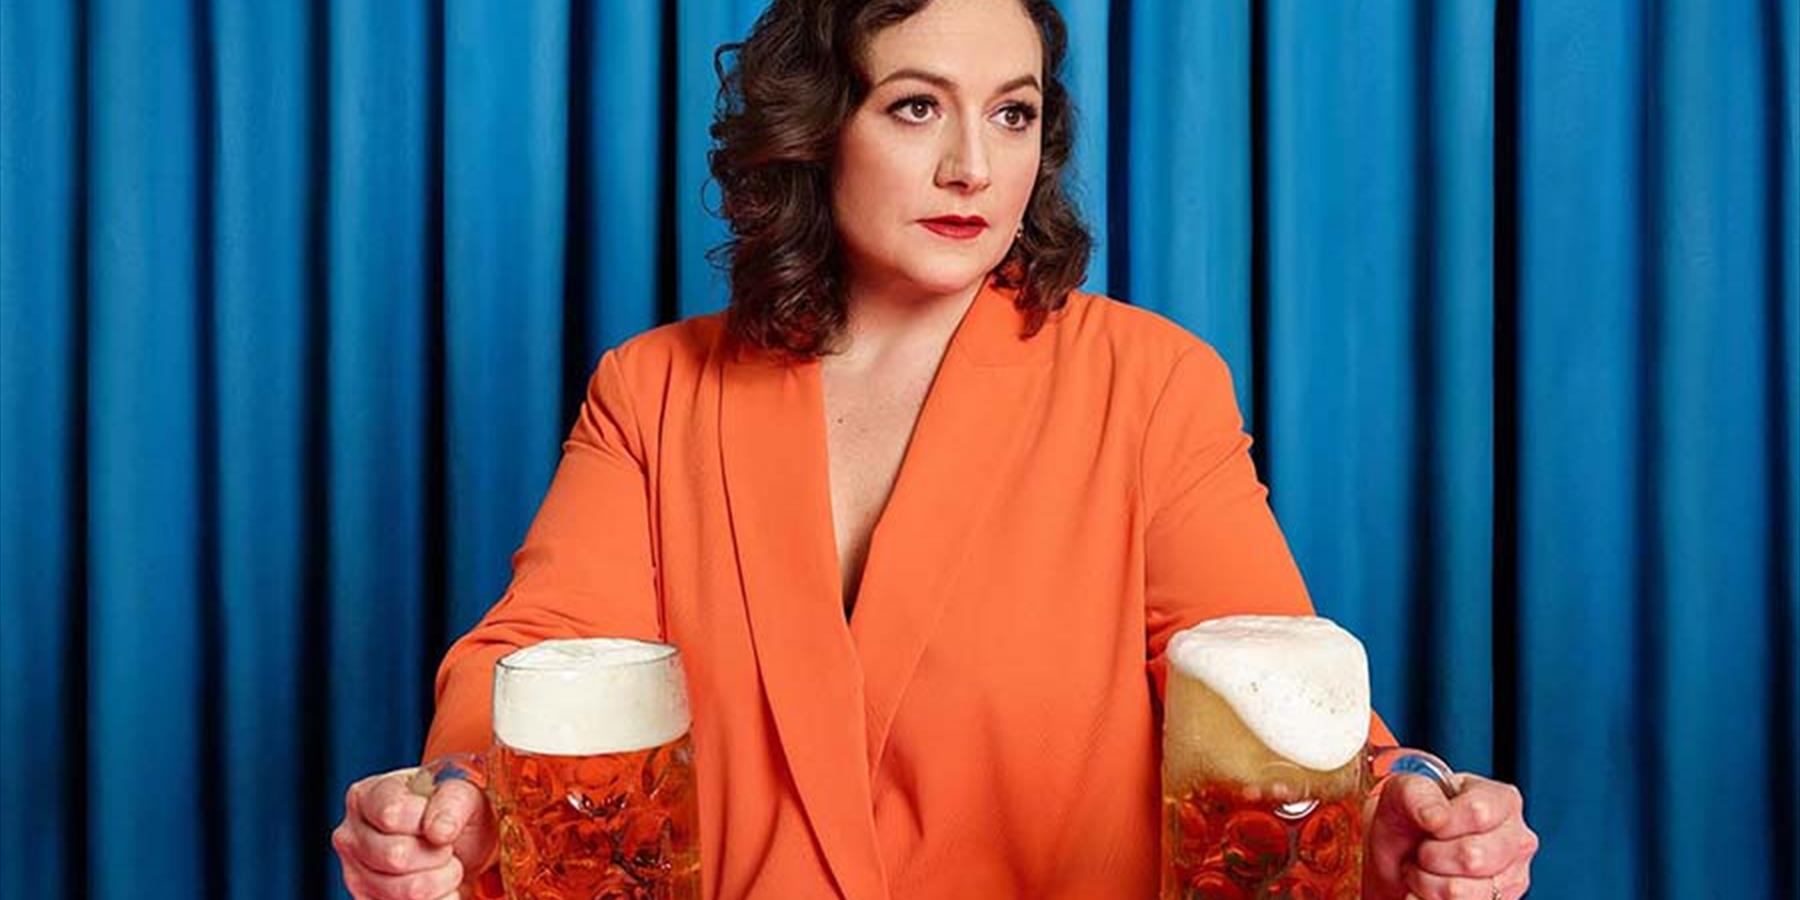 A lady holding two glasses of beer